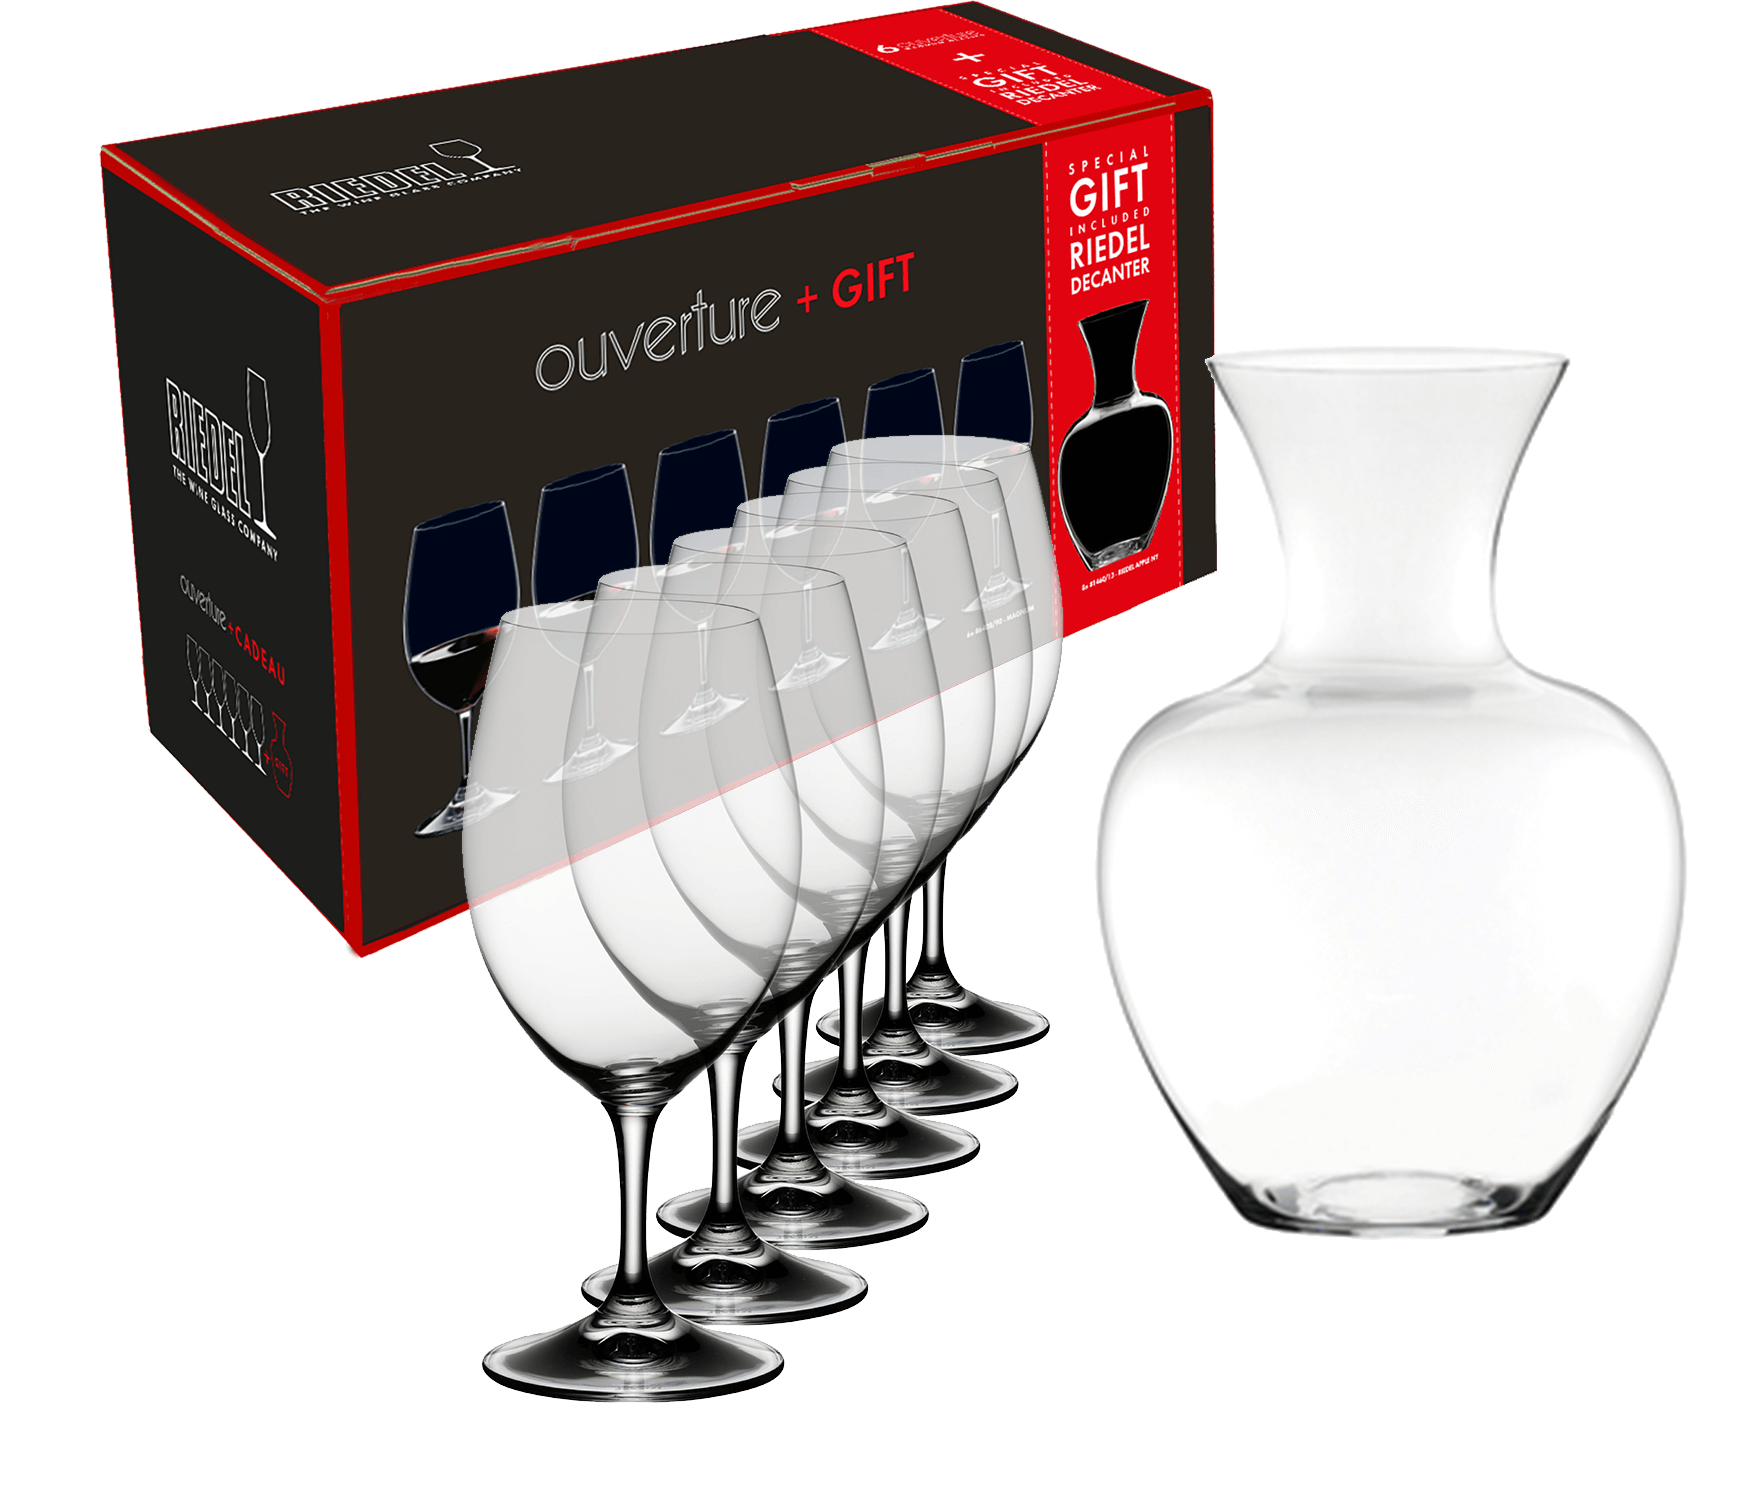 Riedel Ouverture Magnum (6 glasses set) and decanter Apple riedel ouverture magnum 6 glasses set and decanter apple